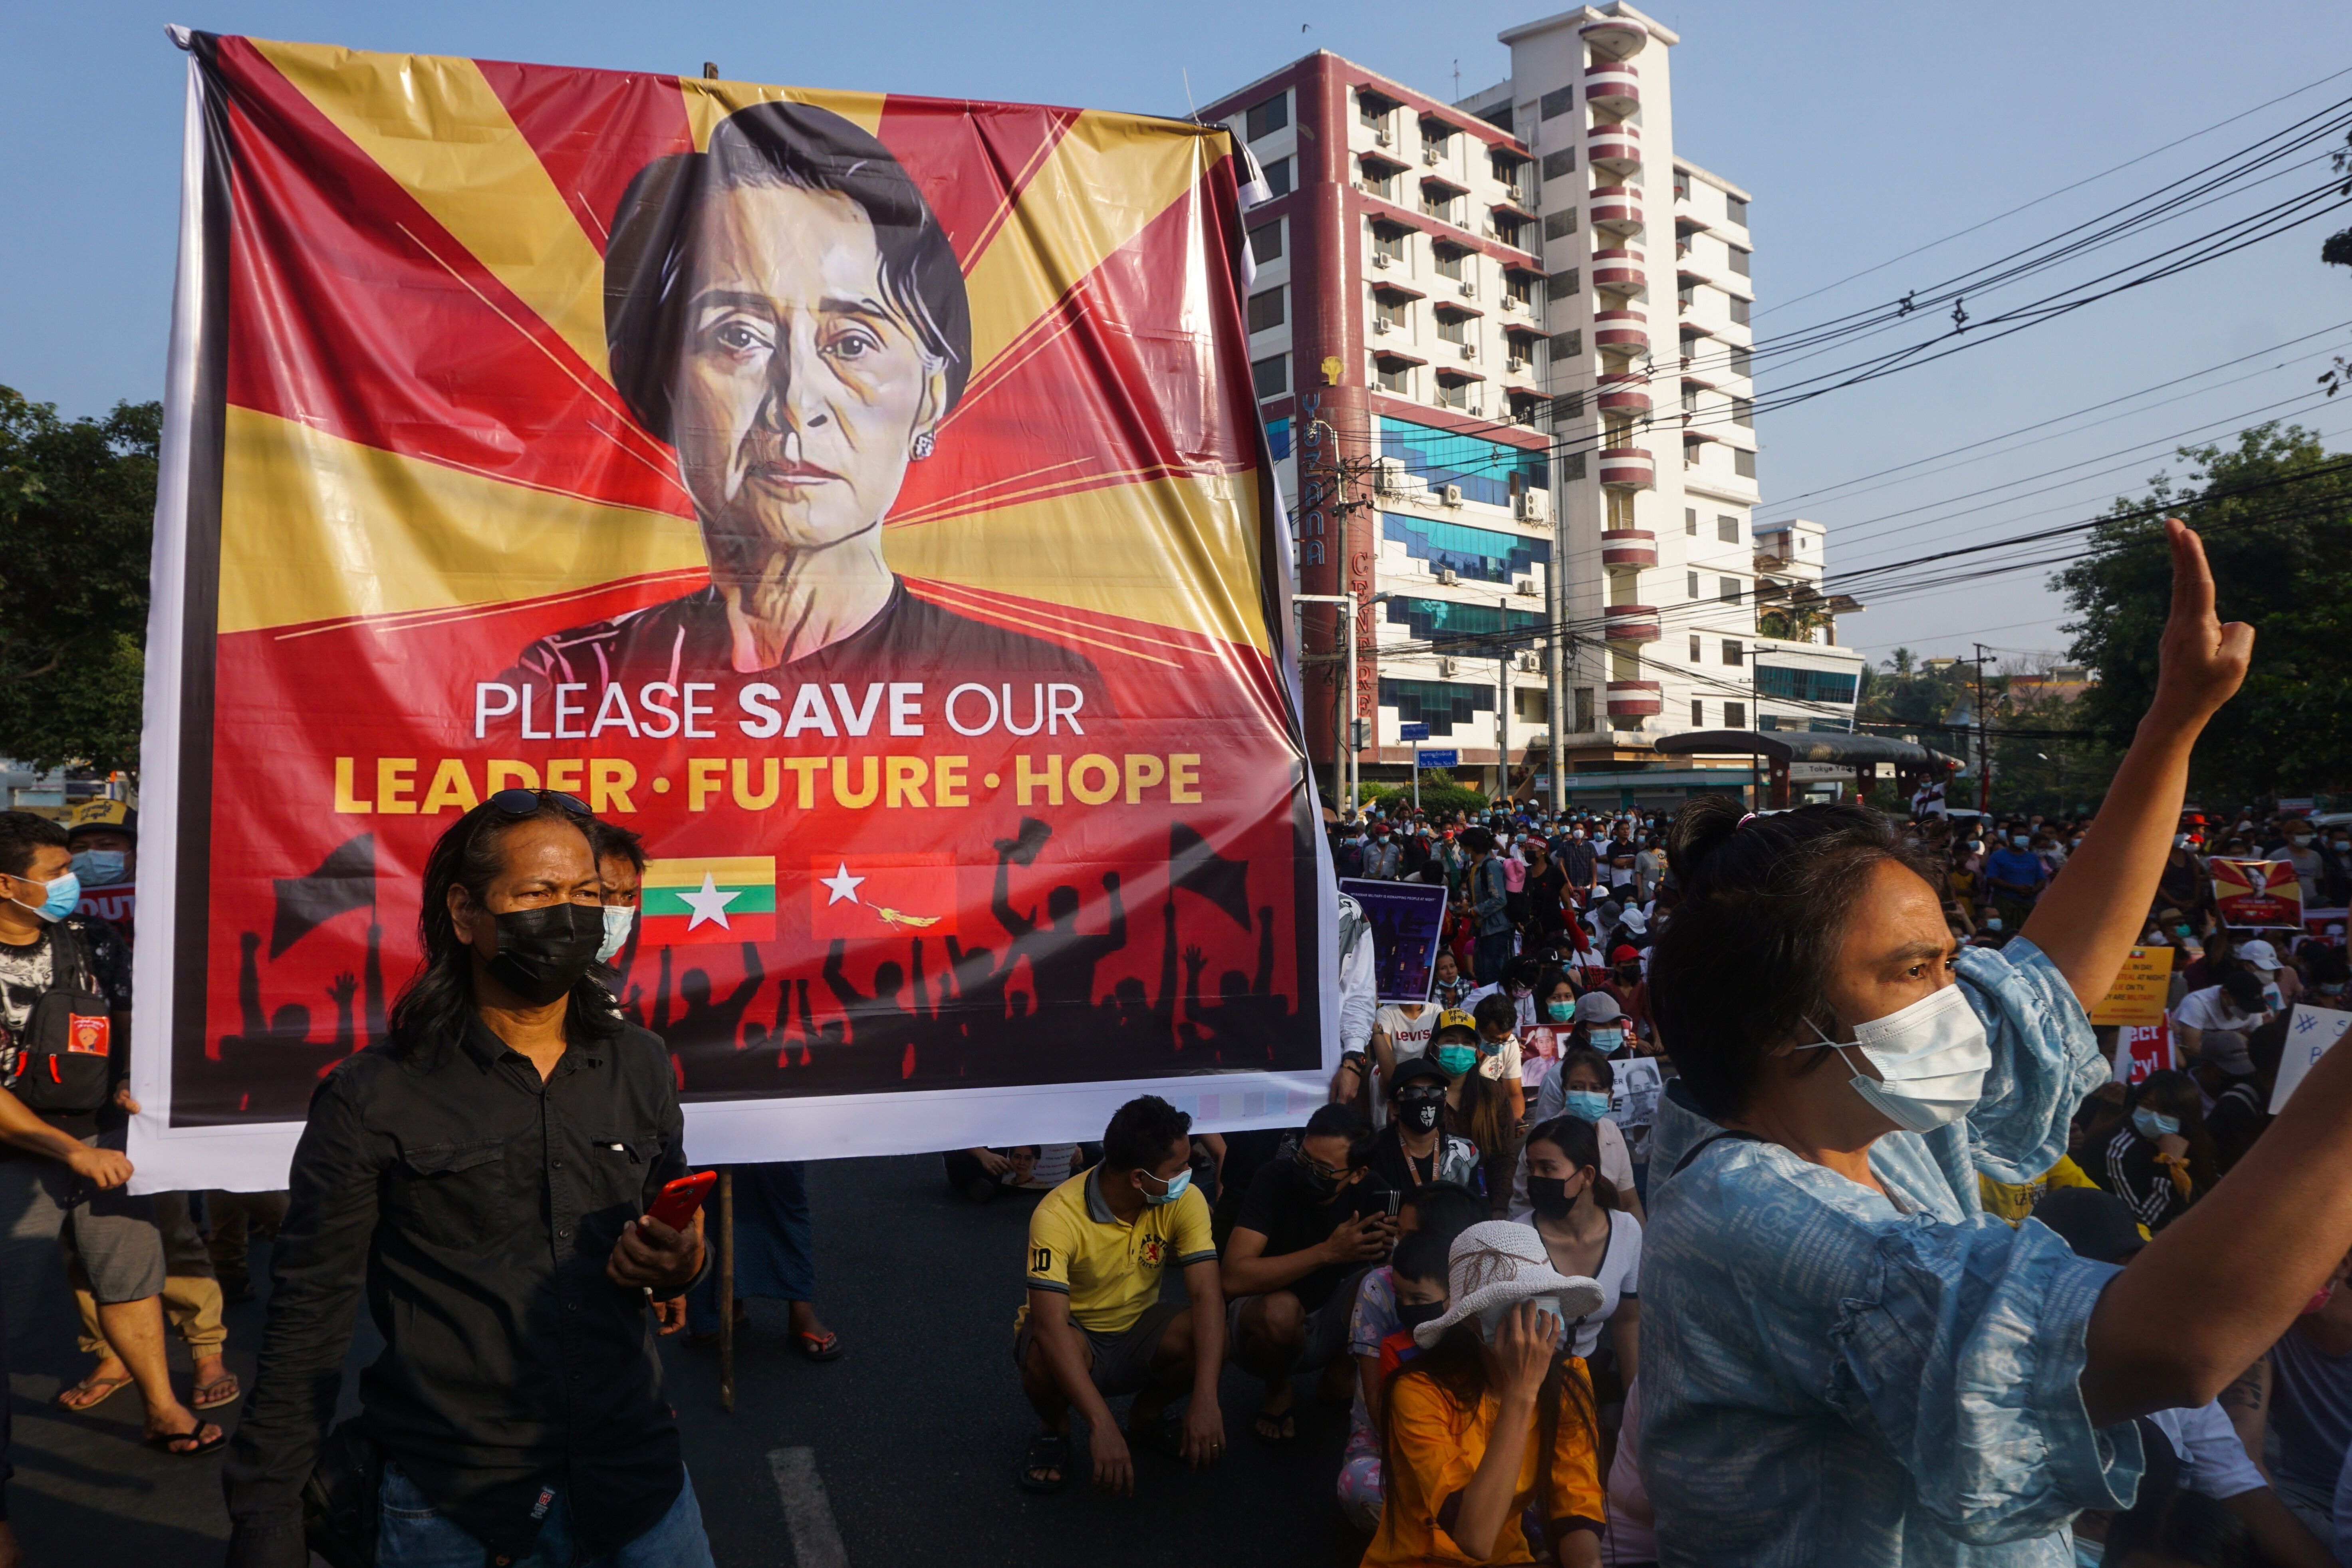 A banner featuring Aung San Suu Kyi is displayed as protesters take part in a demonstration against the military coup in fron